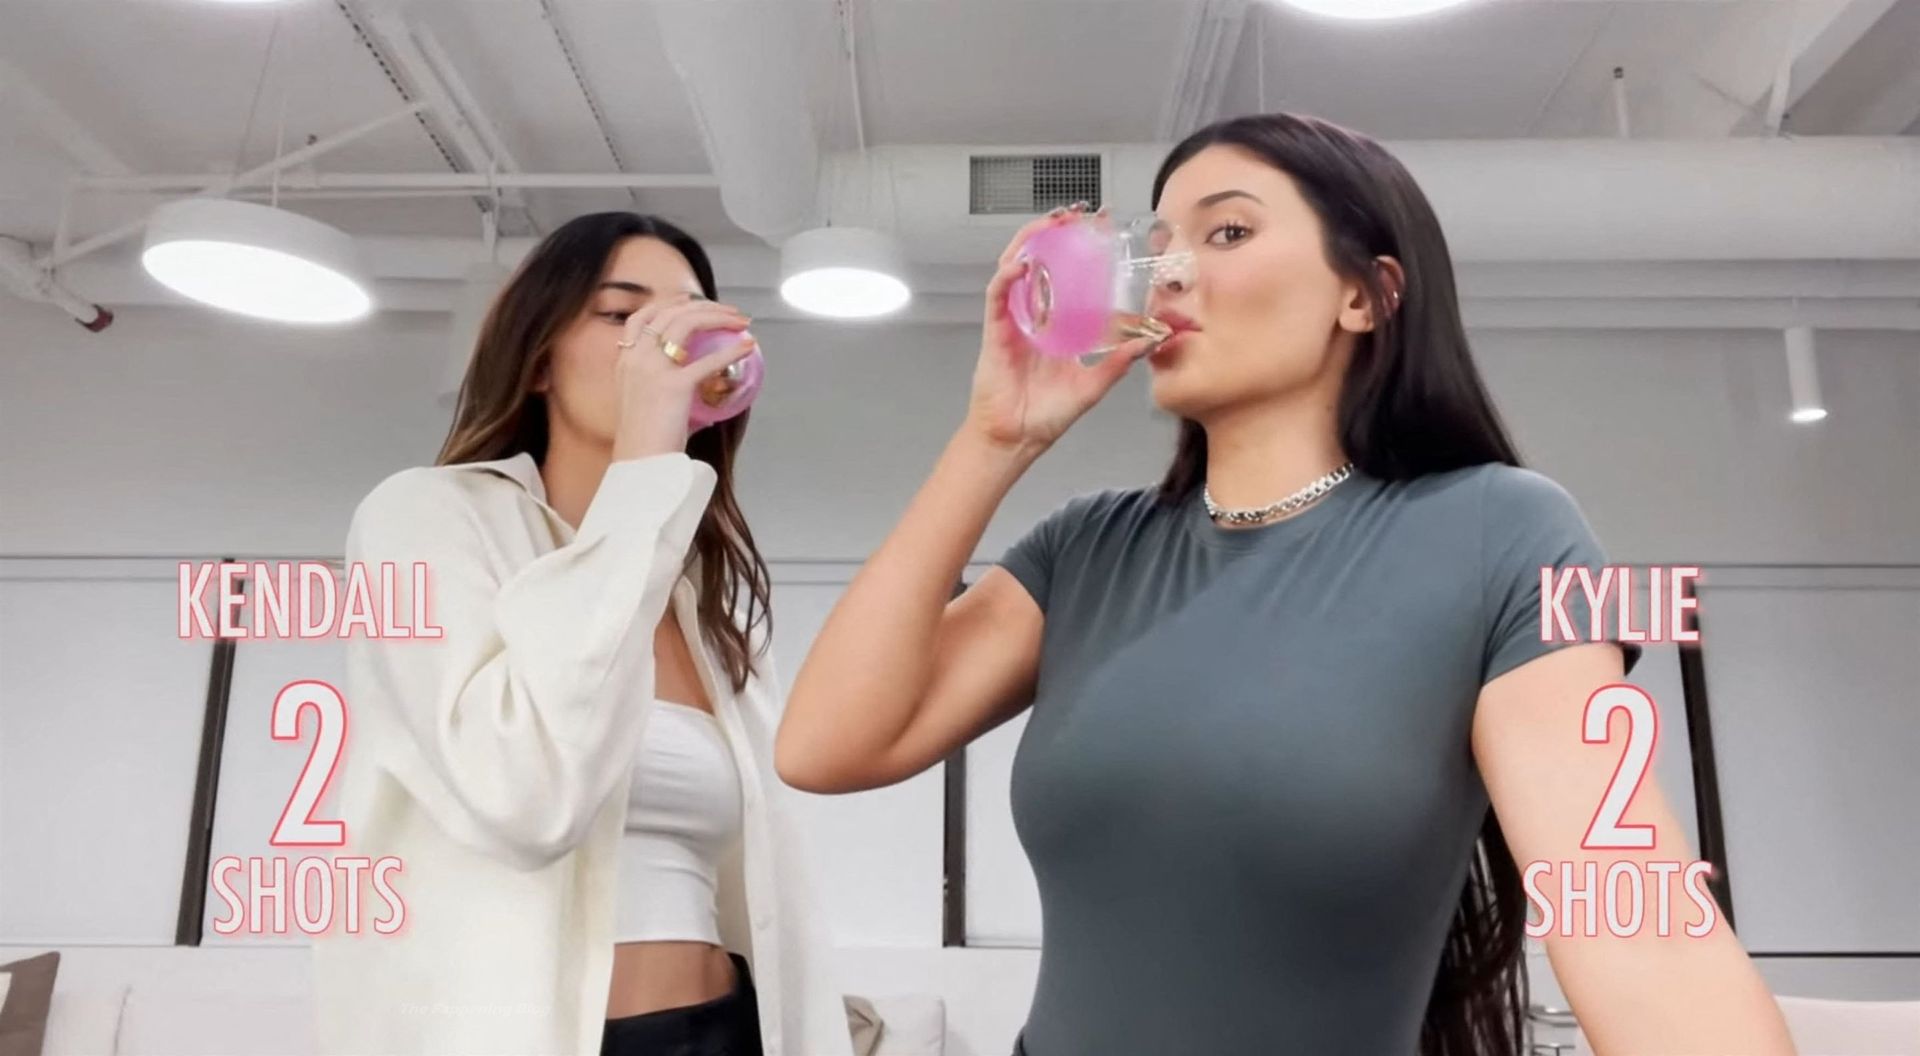 Kendall and Kylie Jenner Sexy - Get Ready With Me (92 Pics + Video) .